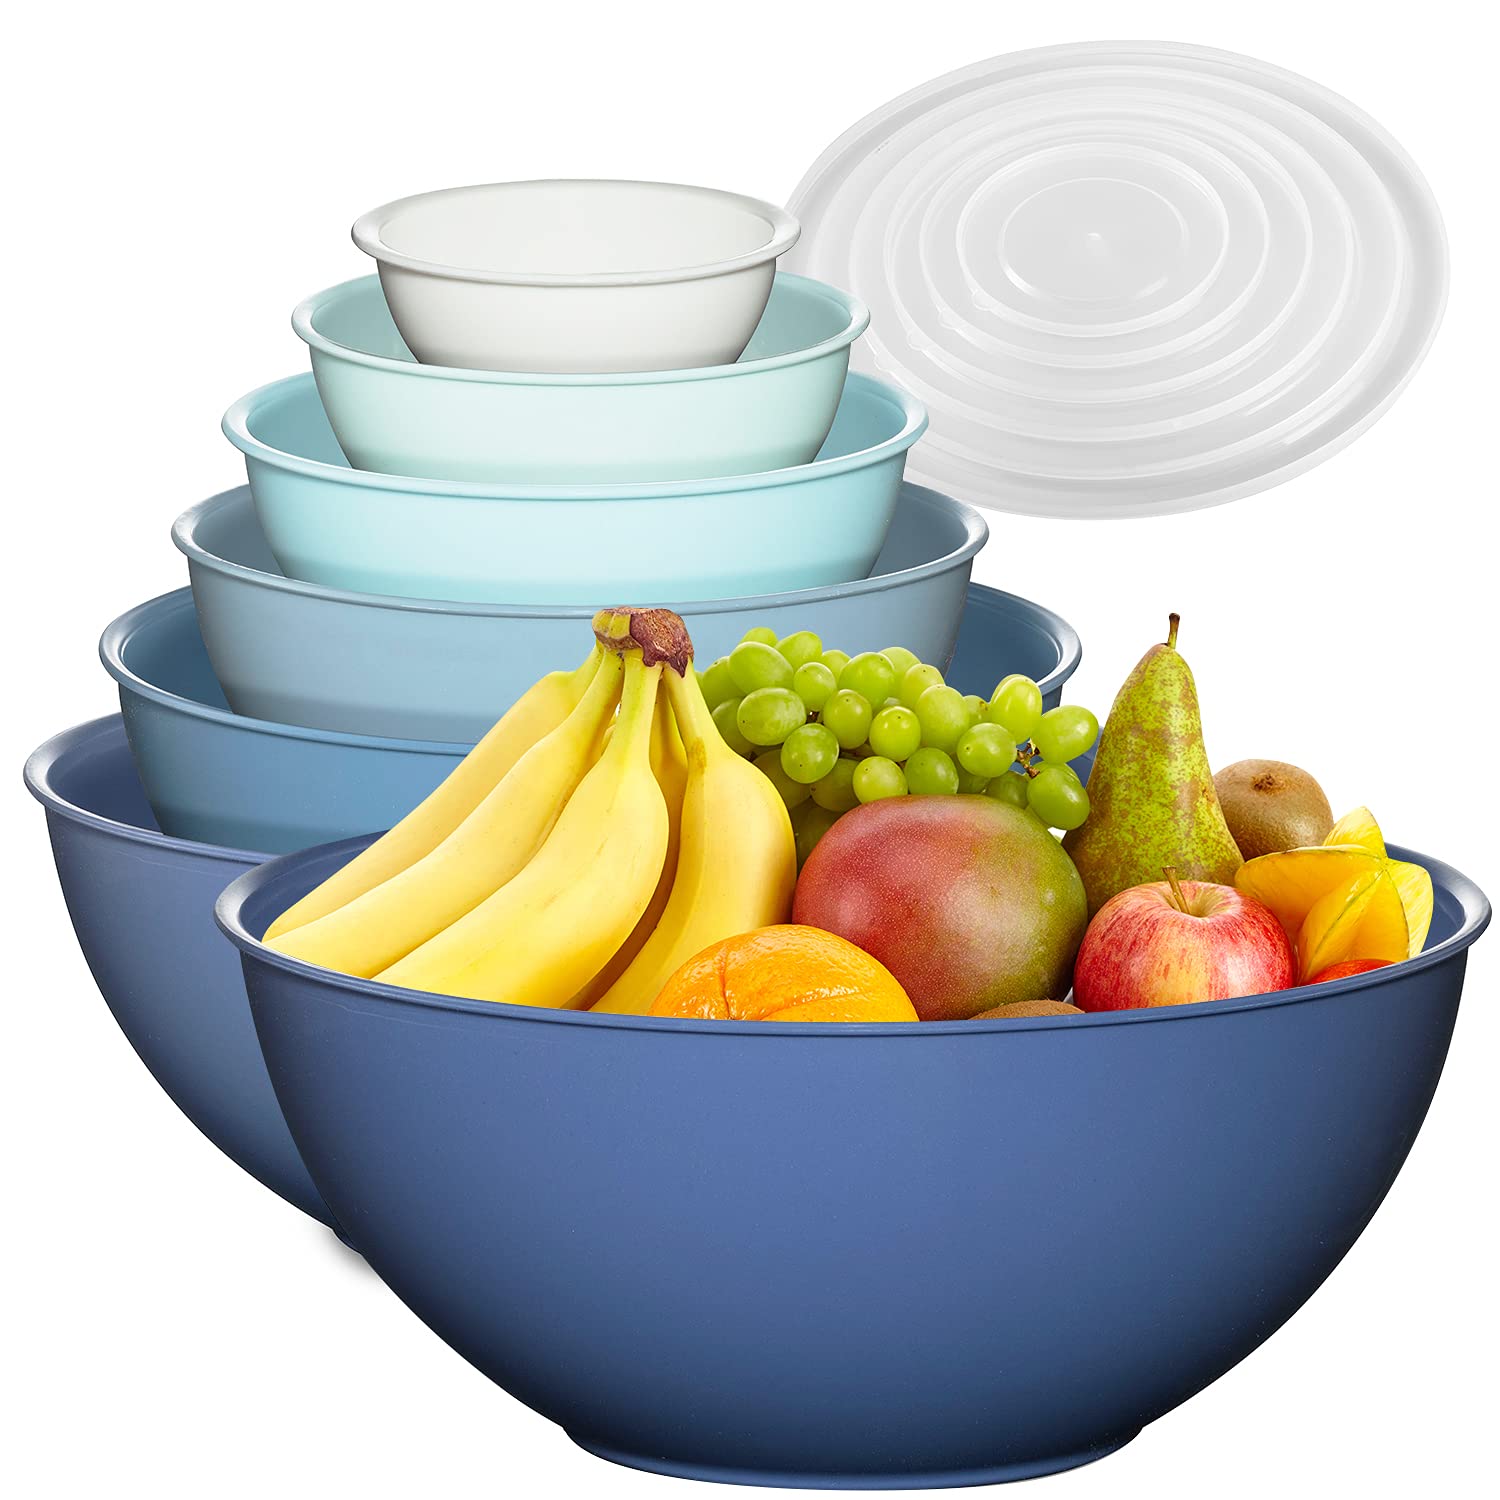 12 Piece Plastic Mixing Bowls Set, Colorful Nesting Bowls with Lids, 6 Prep Bowls and 6 Lids - Color Food Storage for Leftovers, Fruit, Salads, Snacks, and Potluck Dishes - Microwave and Freezer Safe  - Like New